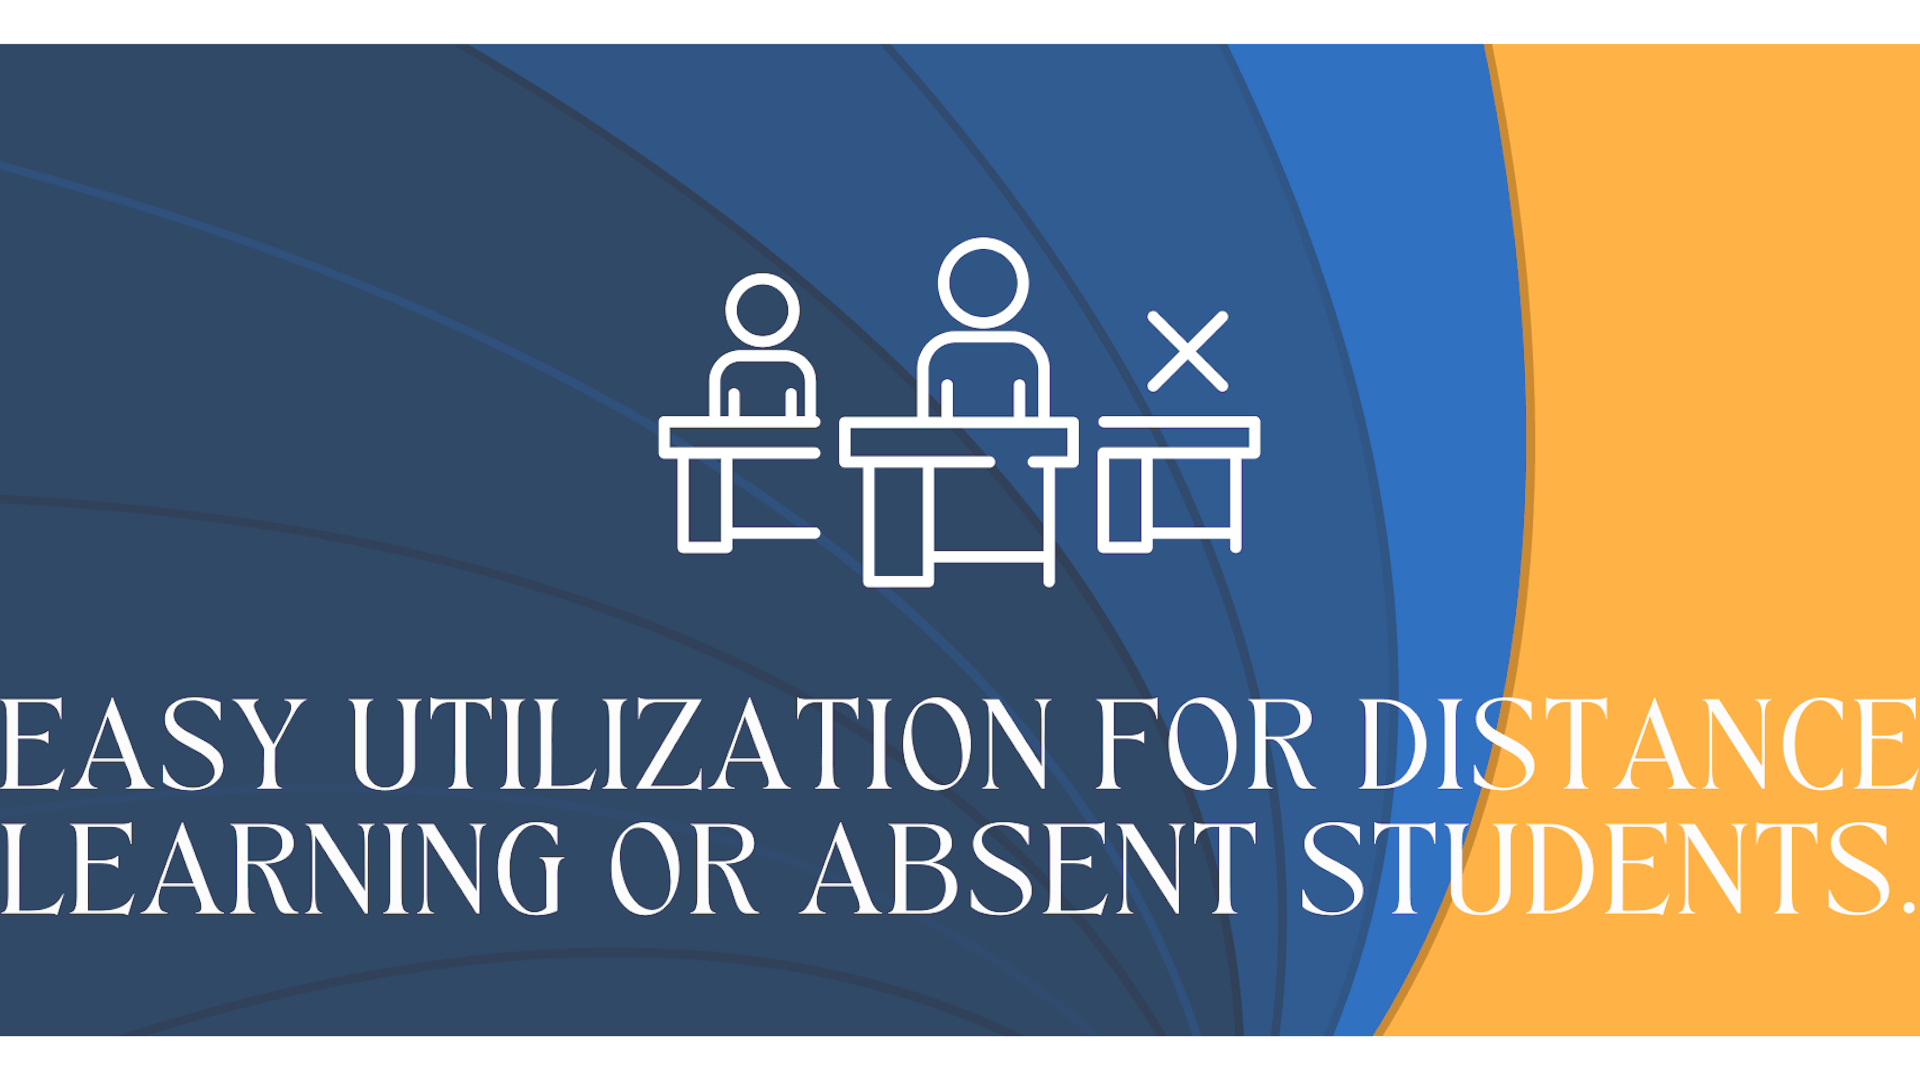 Easy utilization for distance learning or absent students